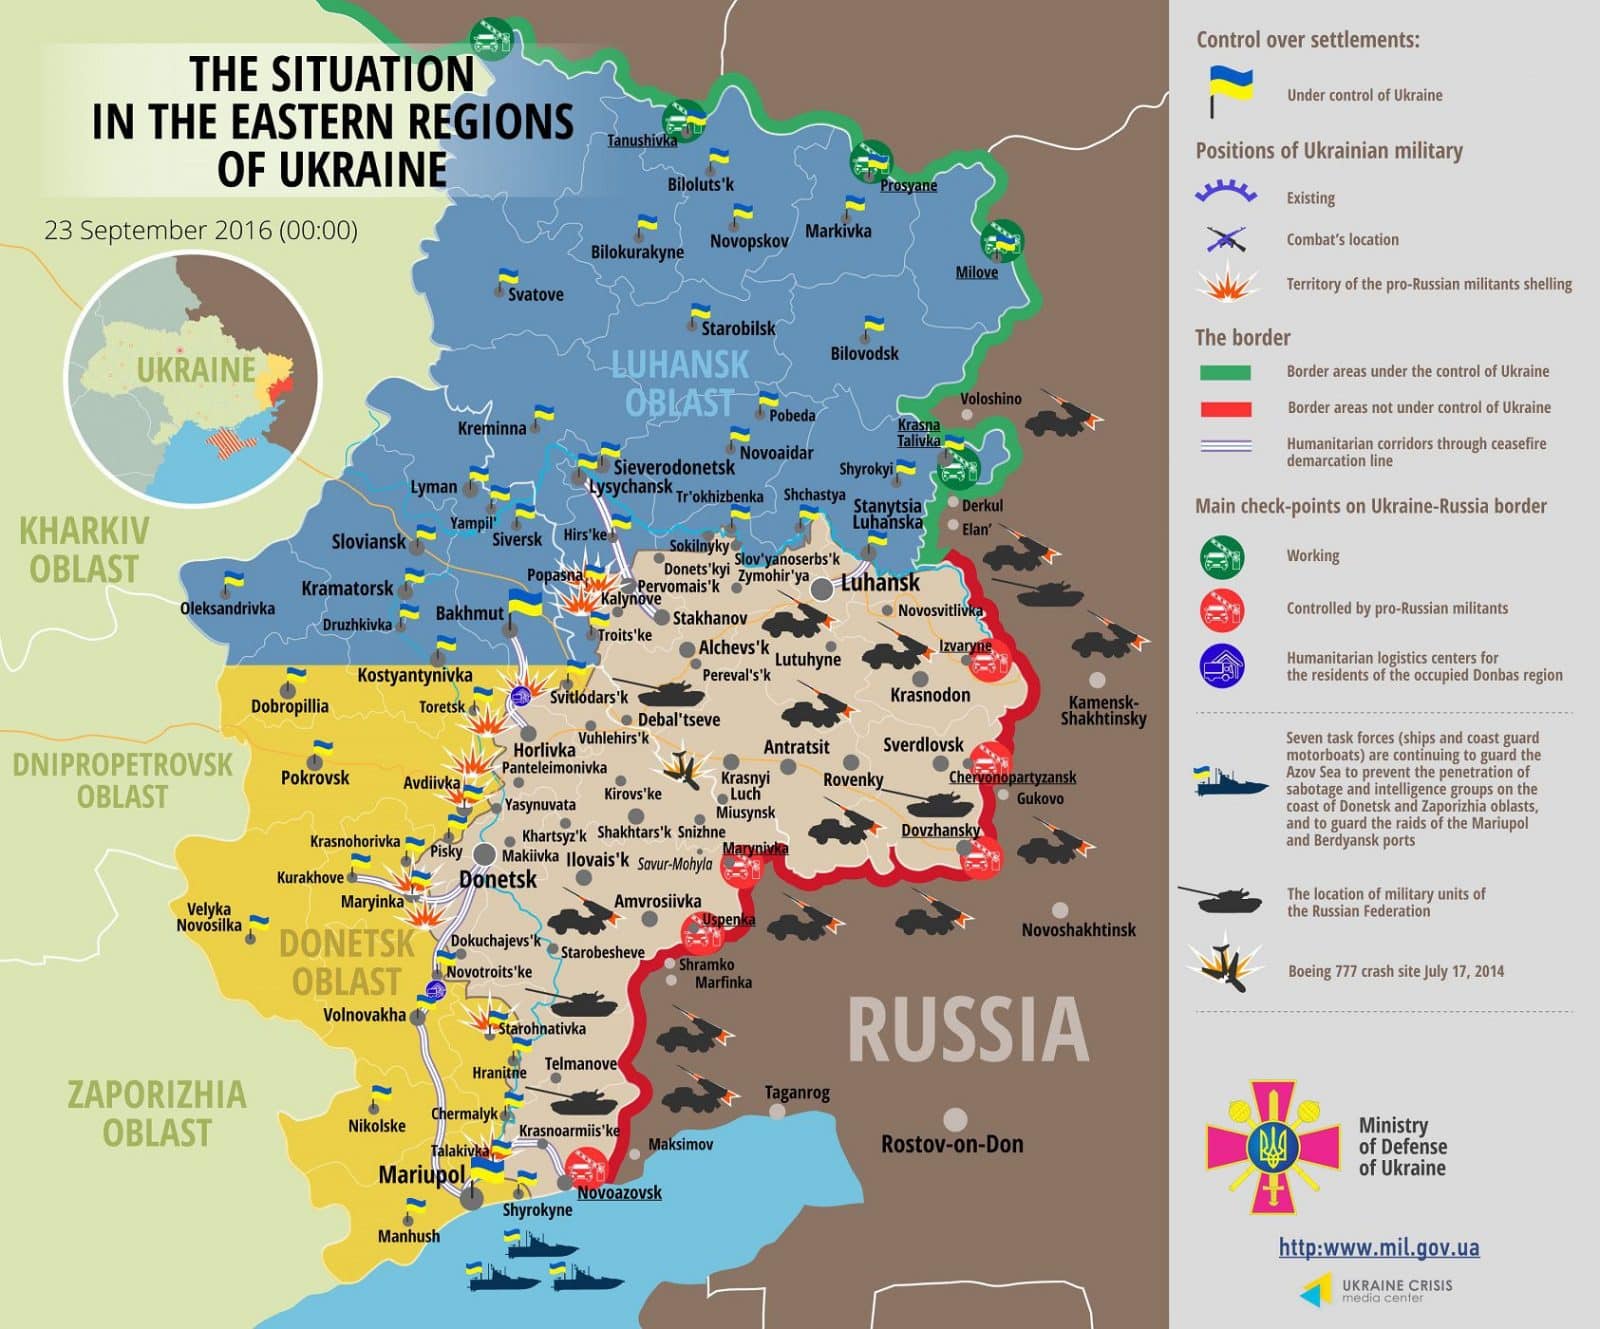 ”Silence” gets louder in Eastern Ukraine: 21 shellings recorded in past 24 hrs